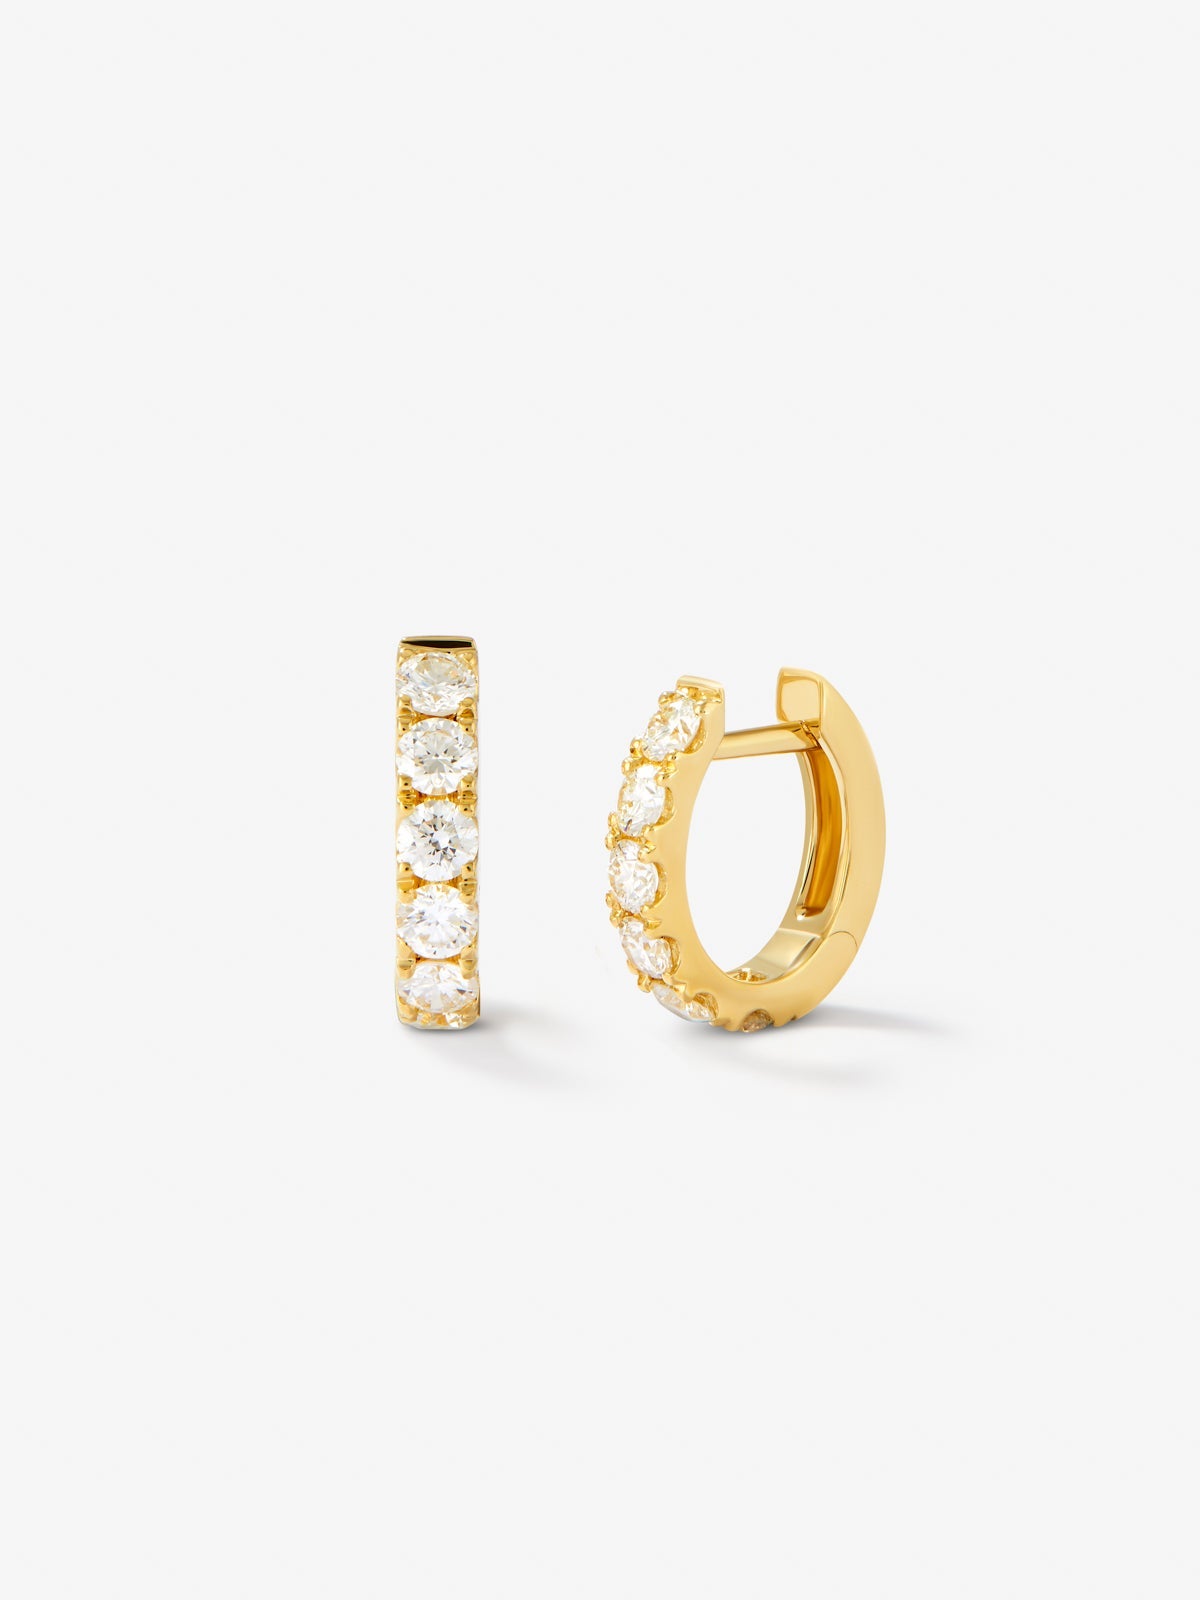 18K yellow gold hoop earrings with 0.65 ct brilliant-cut white diamonds